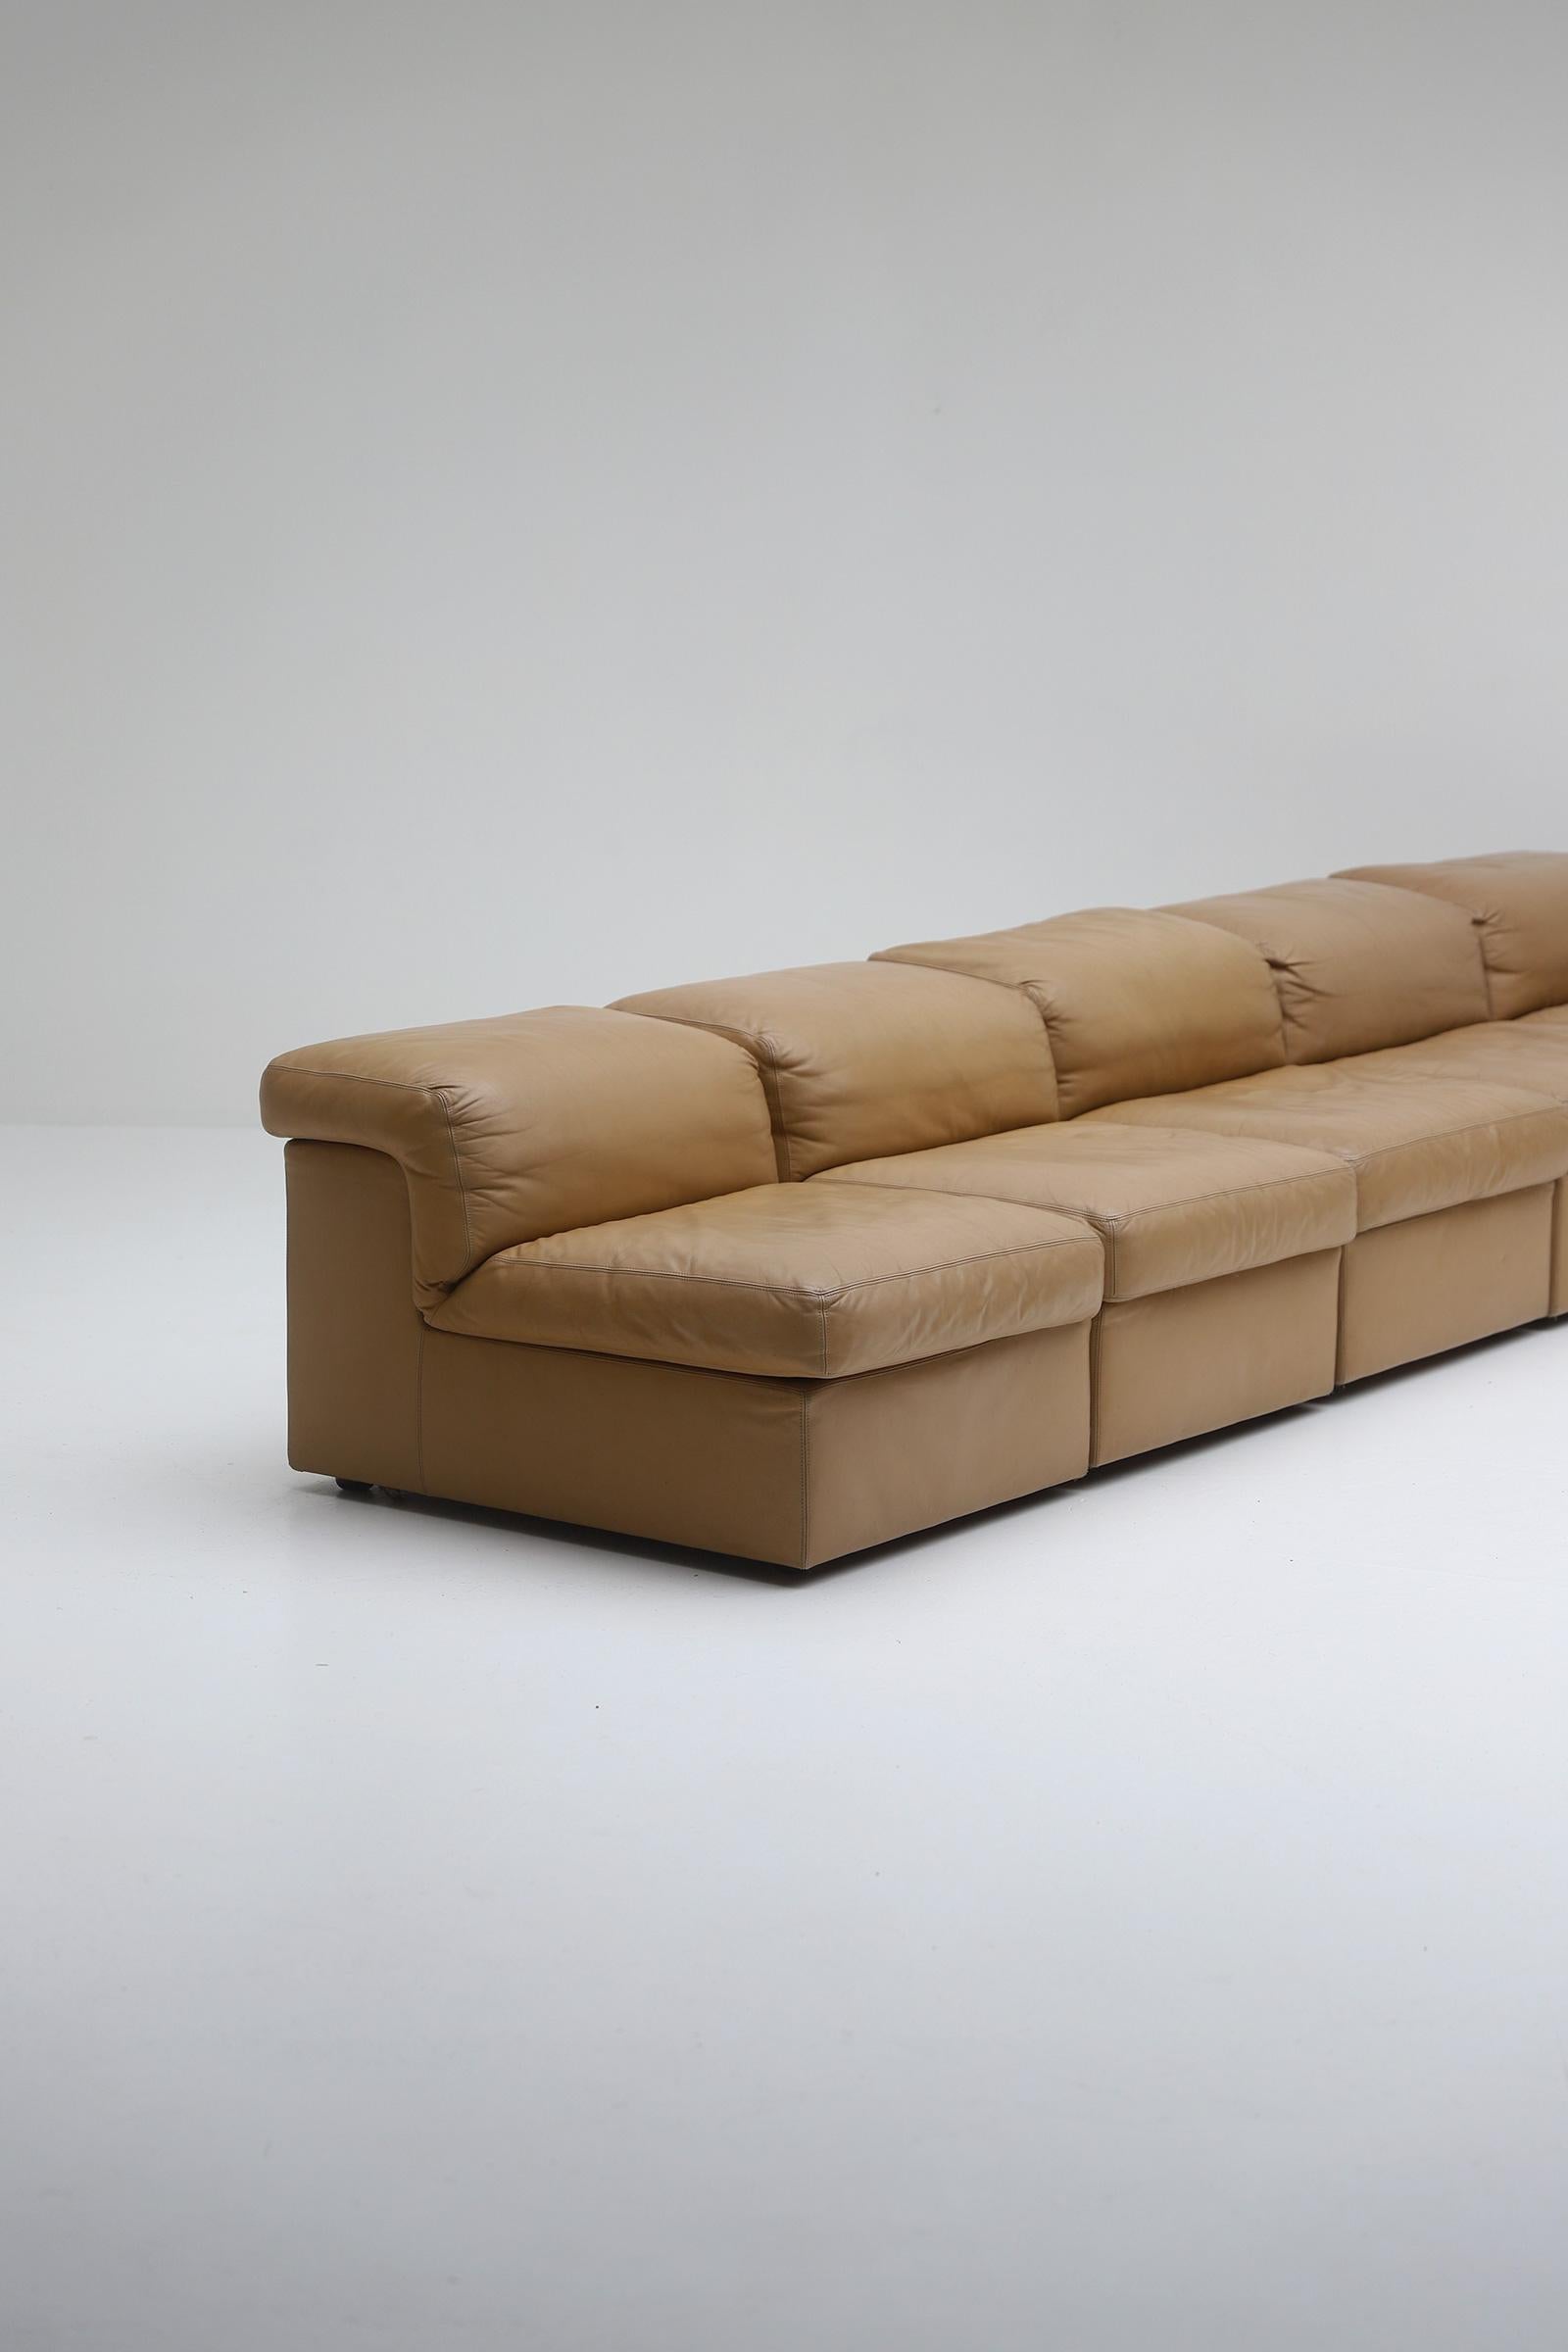 Late 20th Century Modular Jeep Sofa, Manufactured by Durlet, Belgium, 1970s